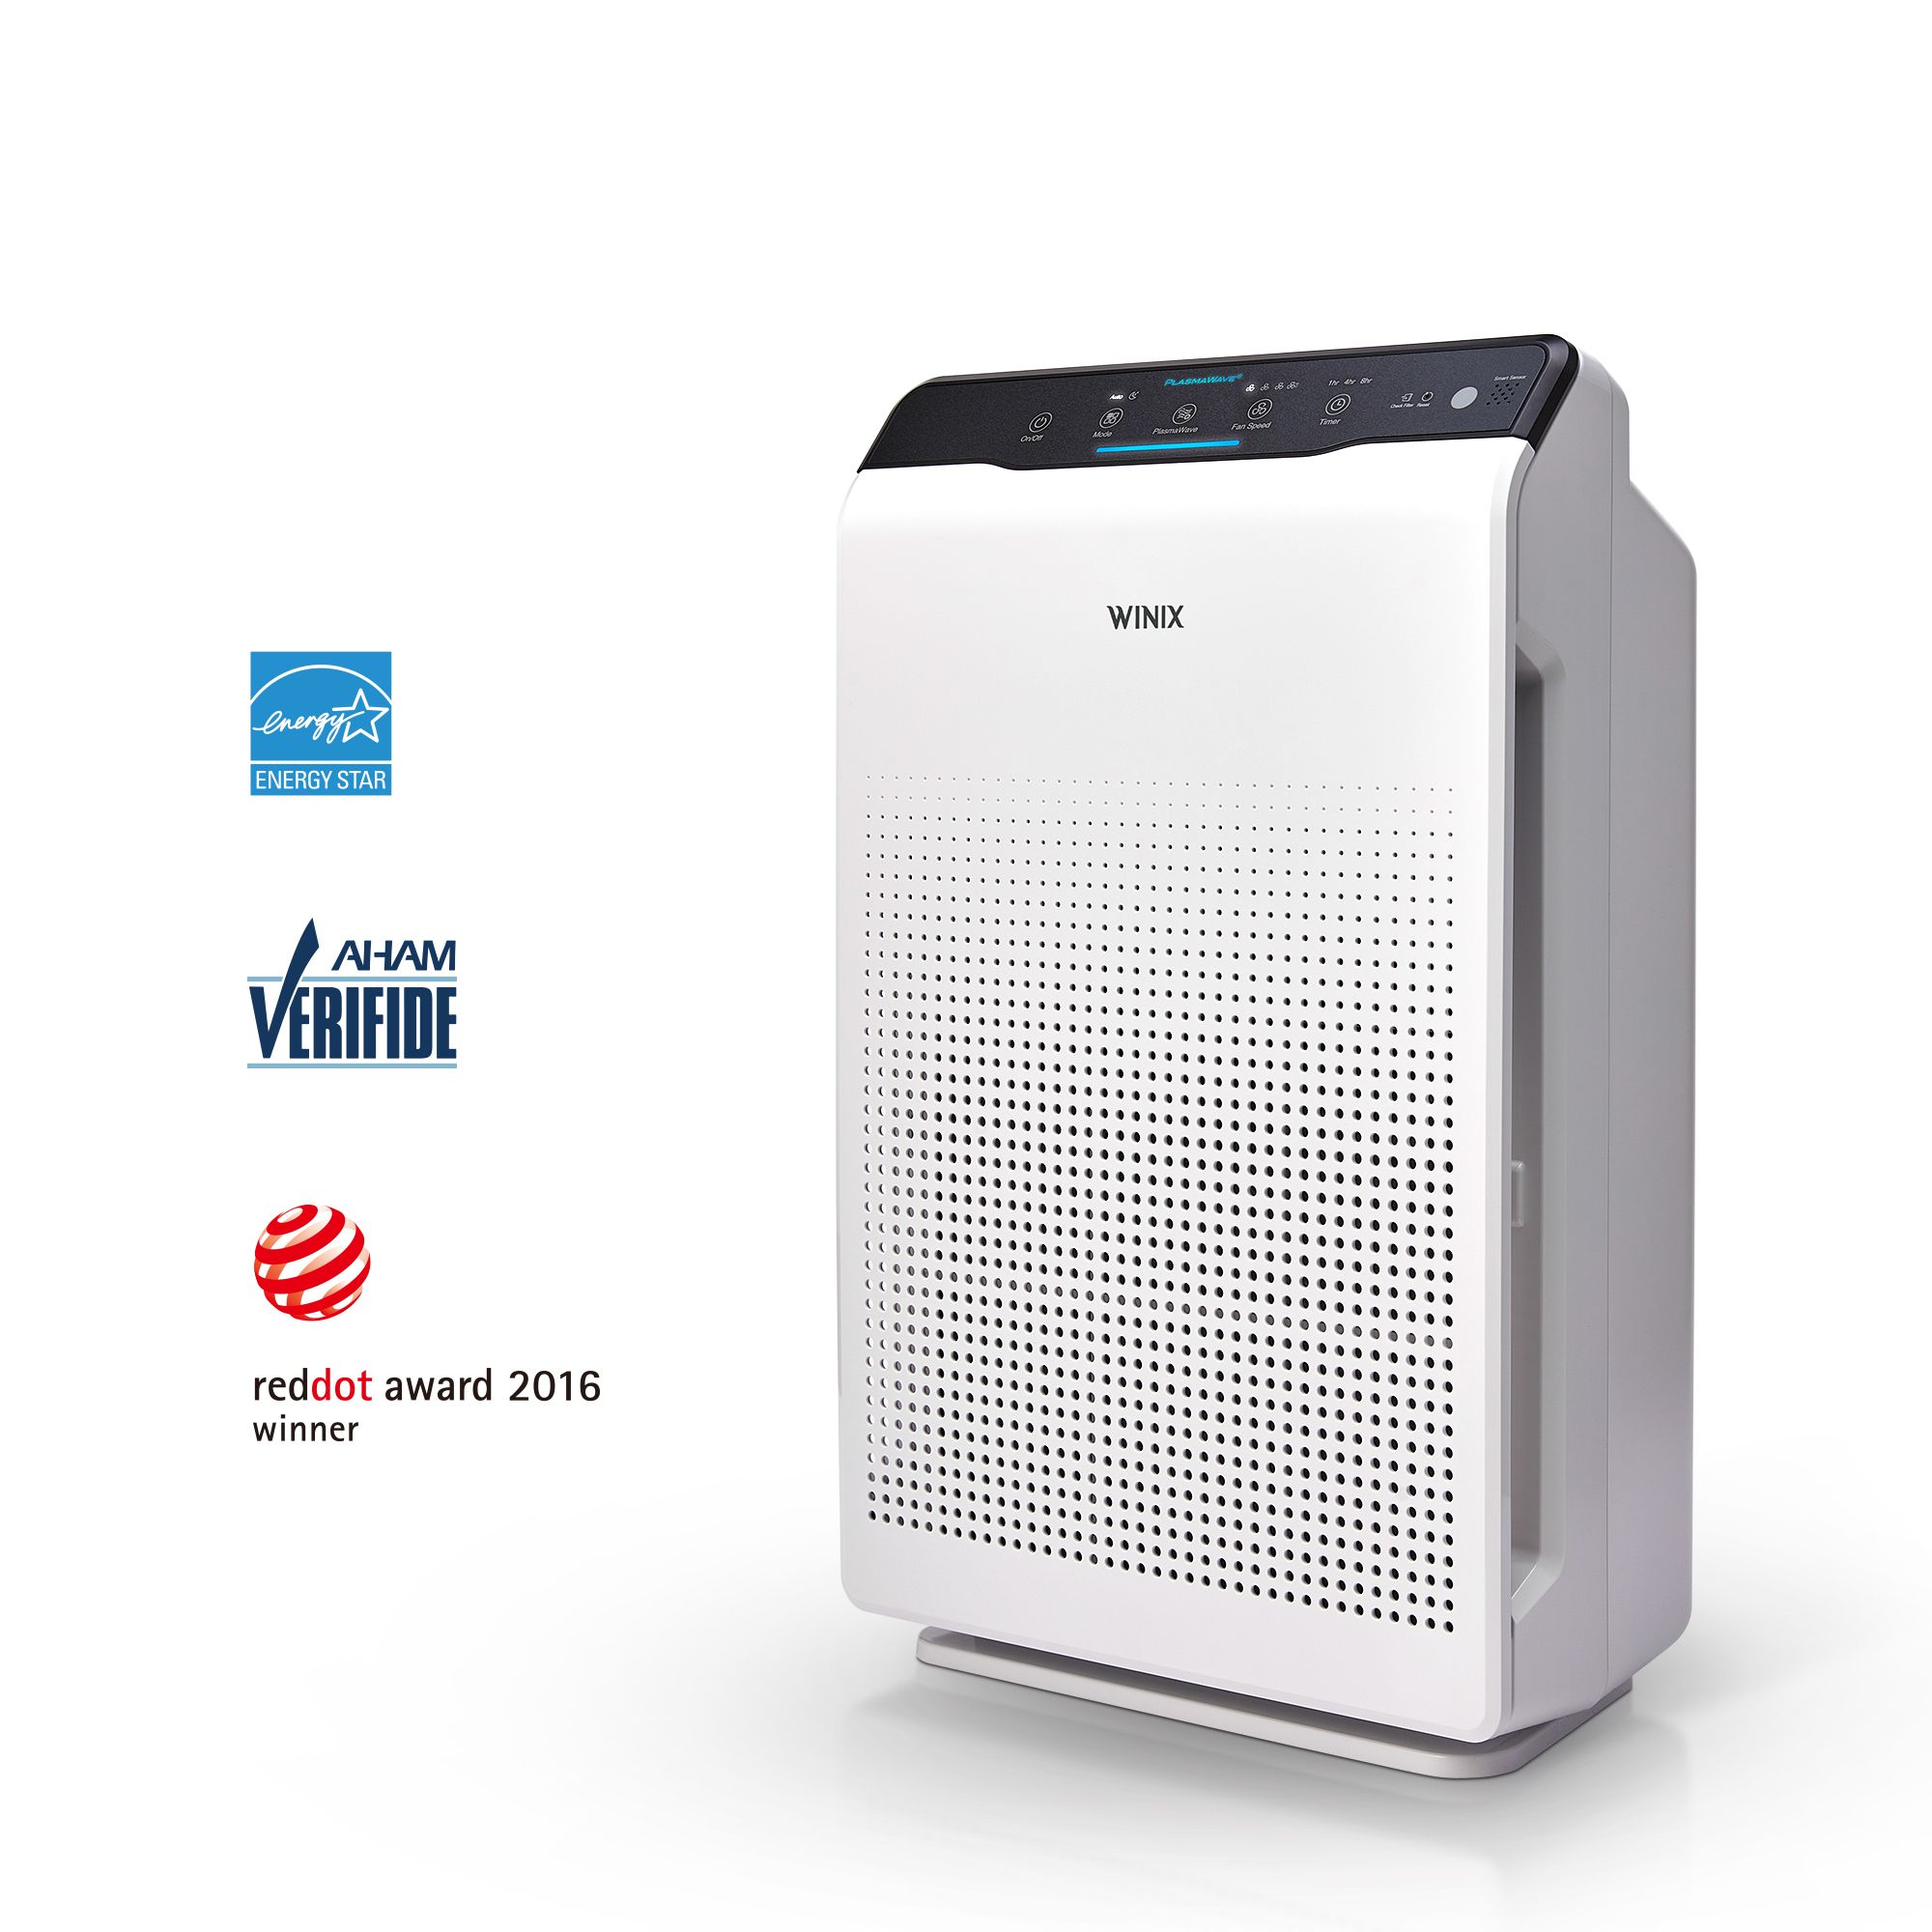 Winix C535 True HEPA 4-Stage Air Purifier for allergens and VOCs with 2 Years of Filters and PlasmaWave Technology AHAM Verified for 360 sq ft and Max Room Capacity 1728 sq ft. - image 3 of 9